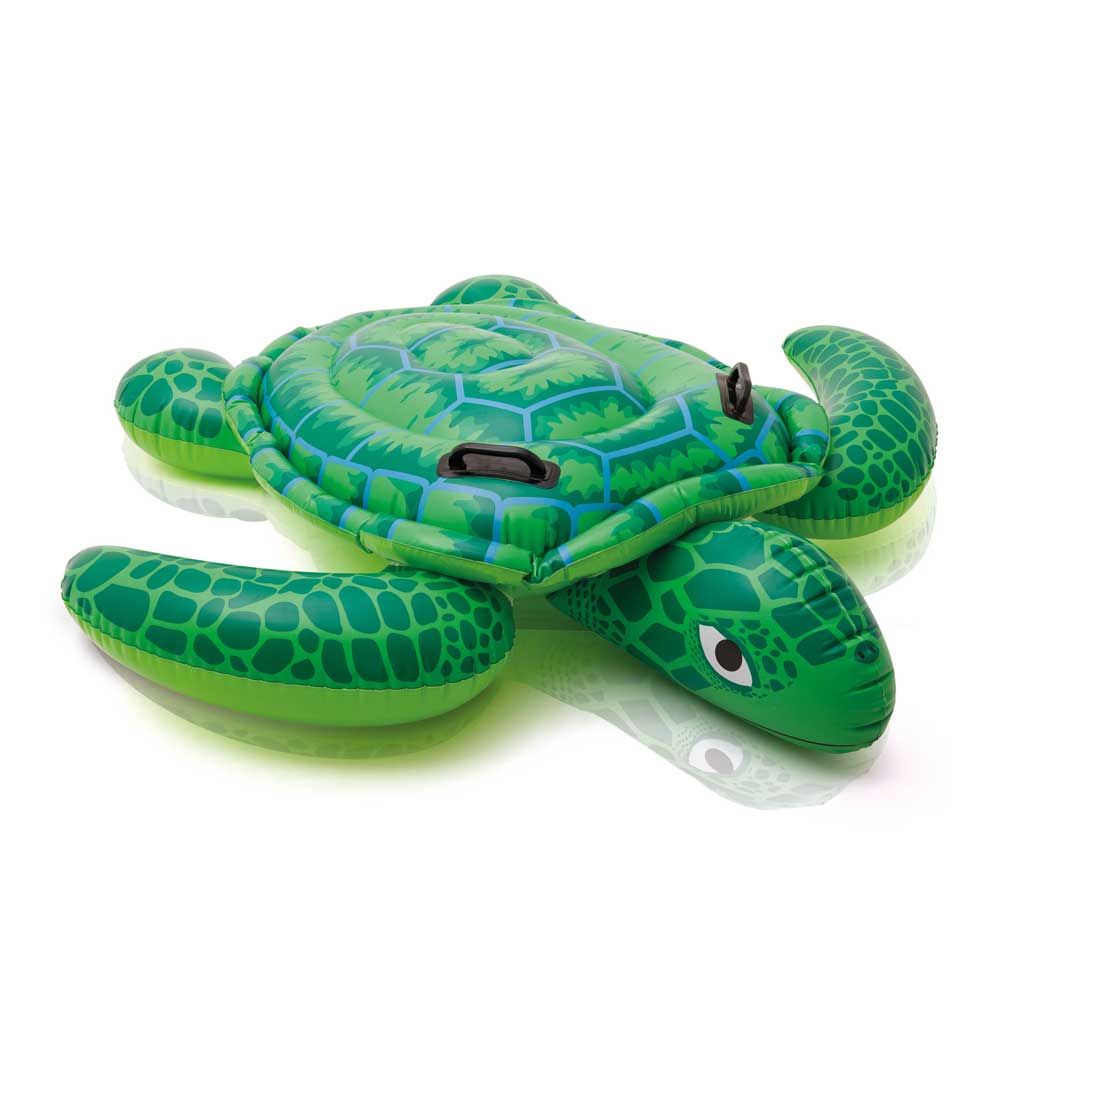 TORTUE GONFLABLE VERT INTEX